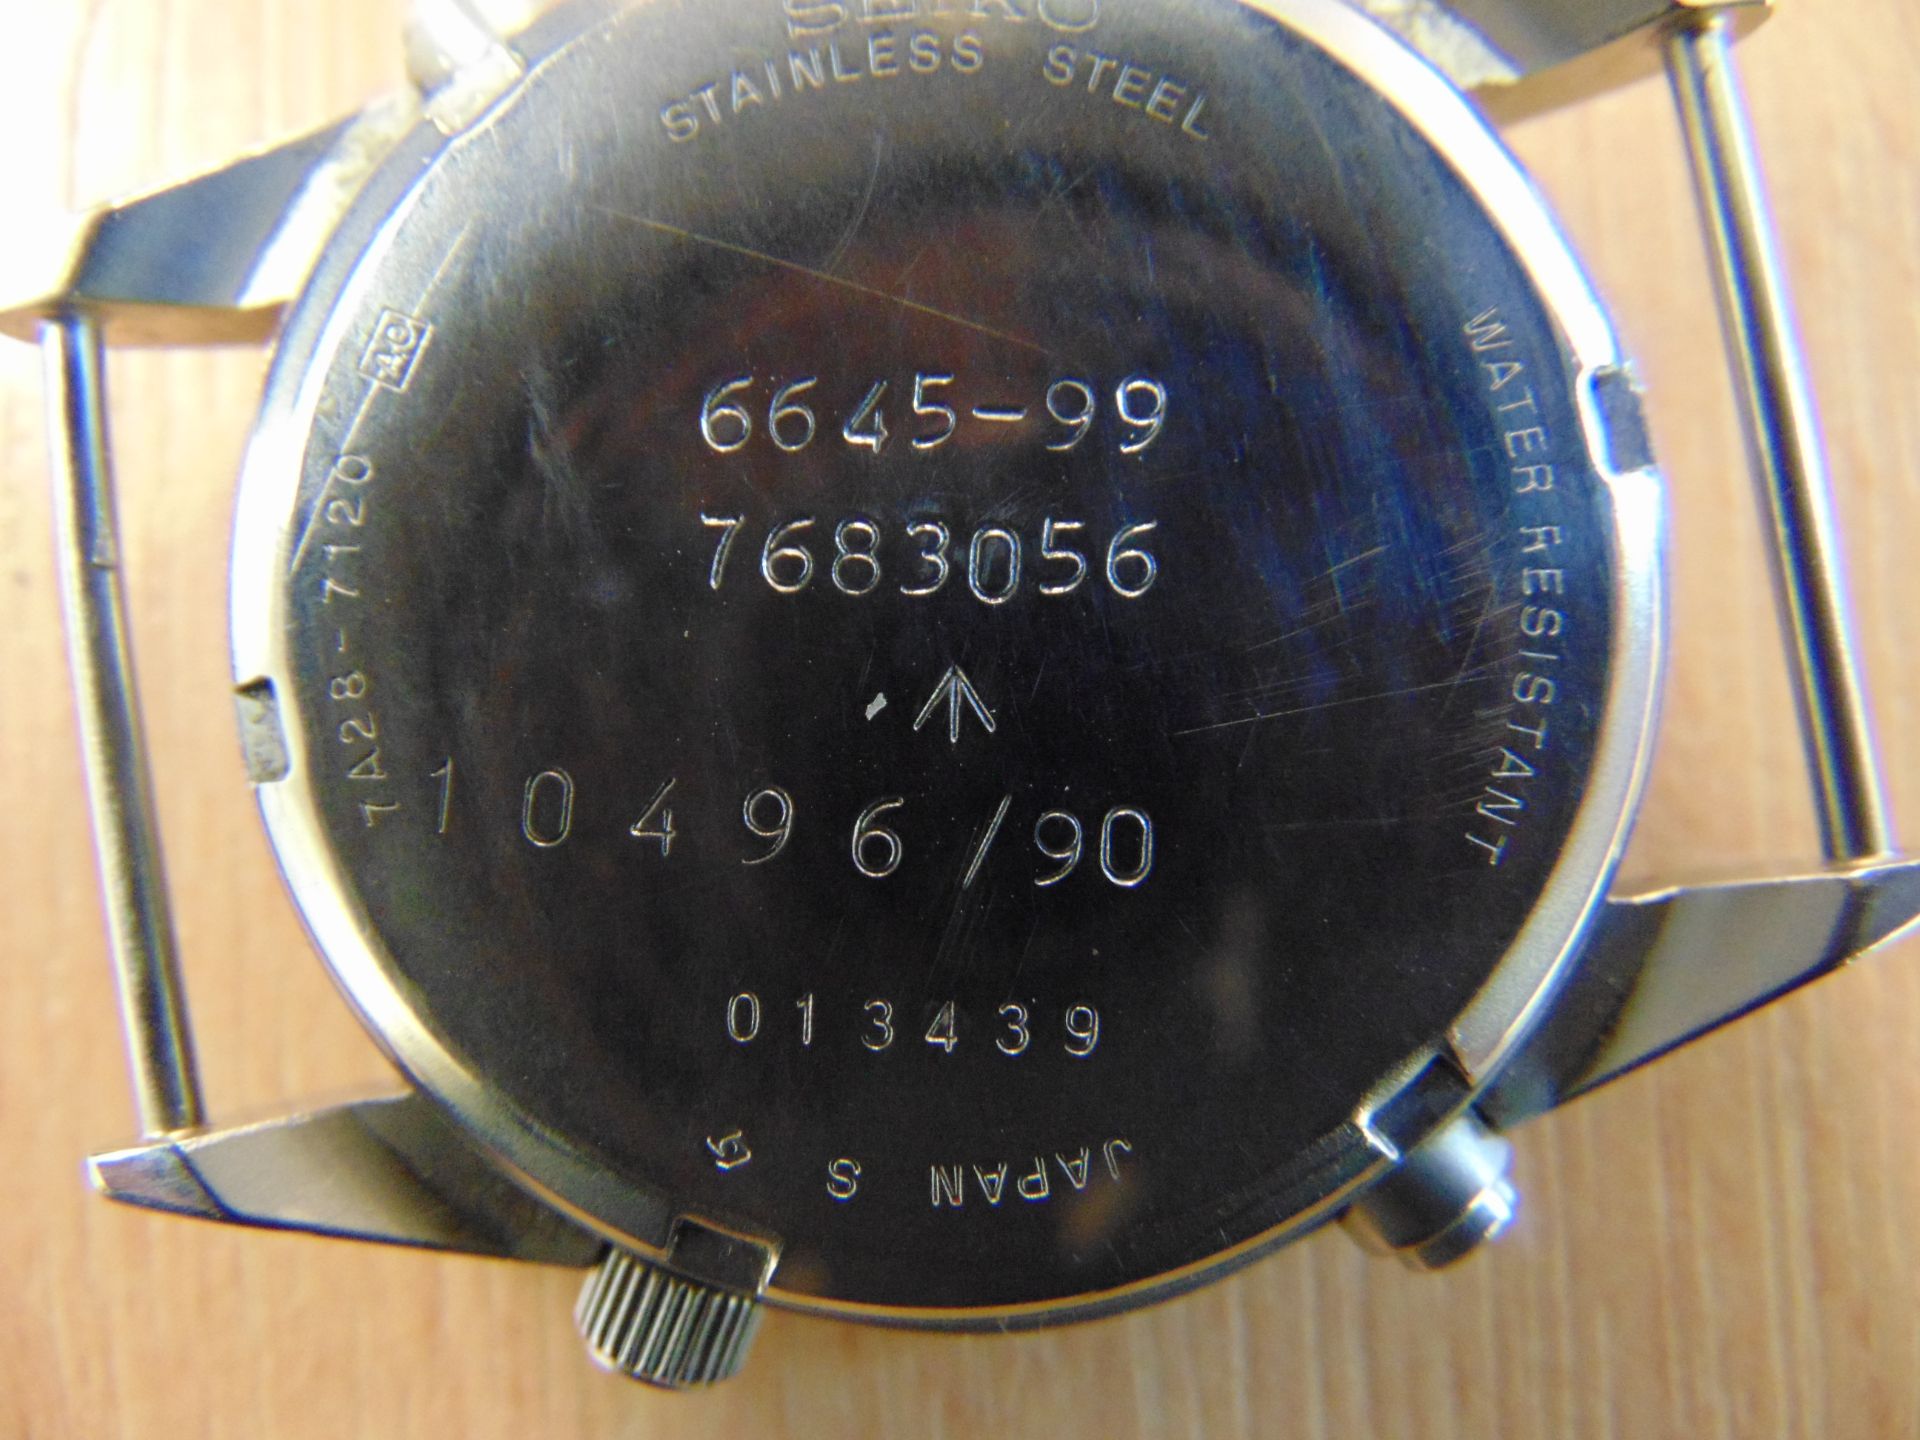 SEIKO GEN 1 PILOTS CHRONO RAF ISSUE Watch NATO MARKINGS DATED 1990 - Image 7 of 10